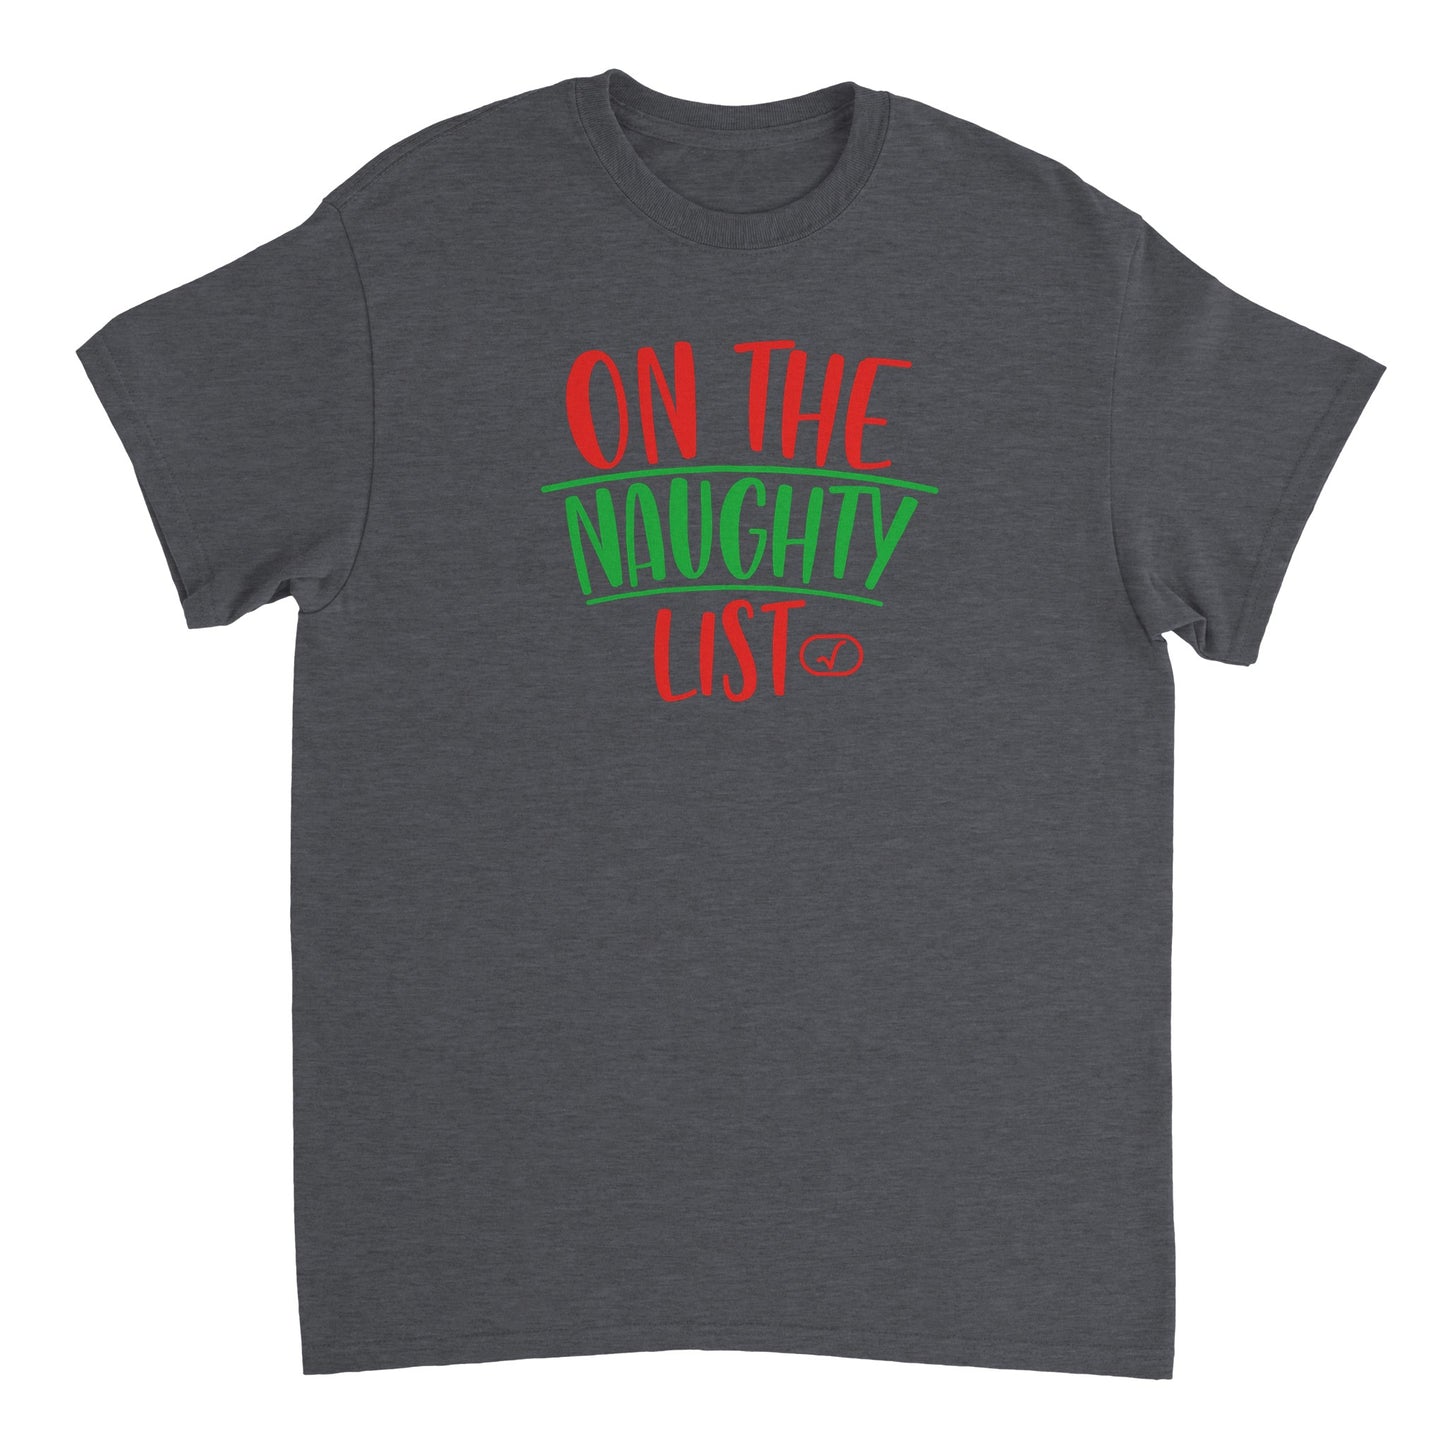 a t - shirt that says on the naughty list